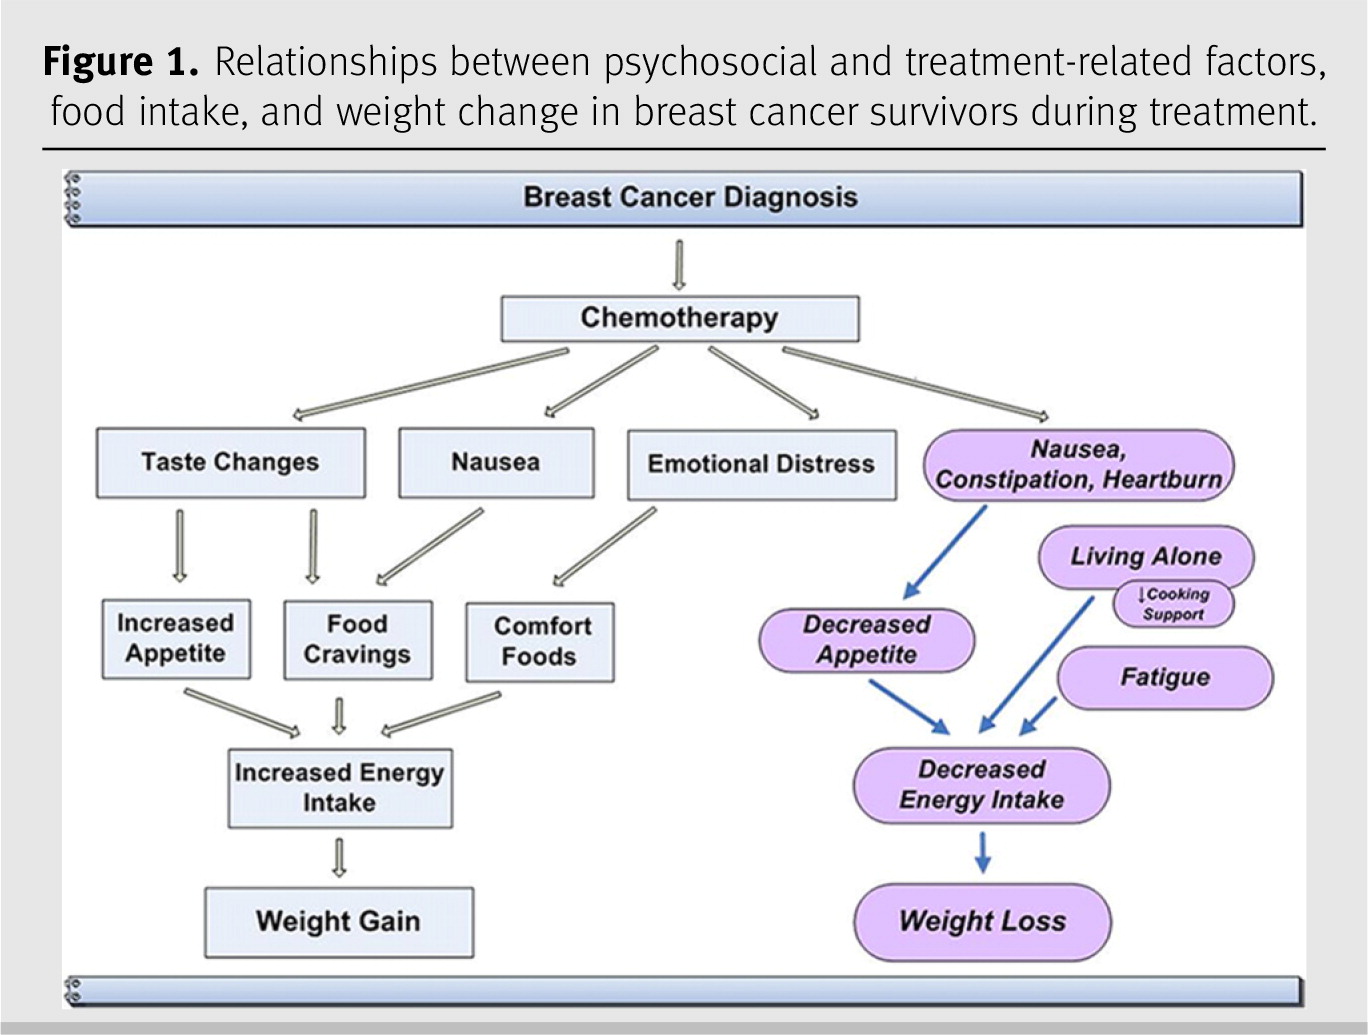 The Voice Of Experience Diet And Weight Change In Women With Breast Cancer Associate With Psychosocial And Treatment Related Challenges